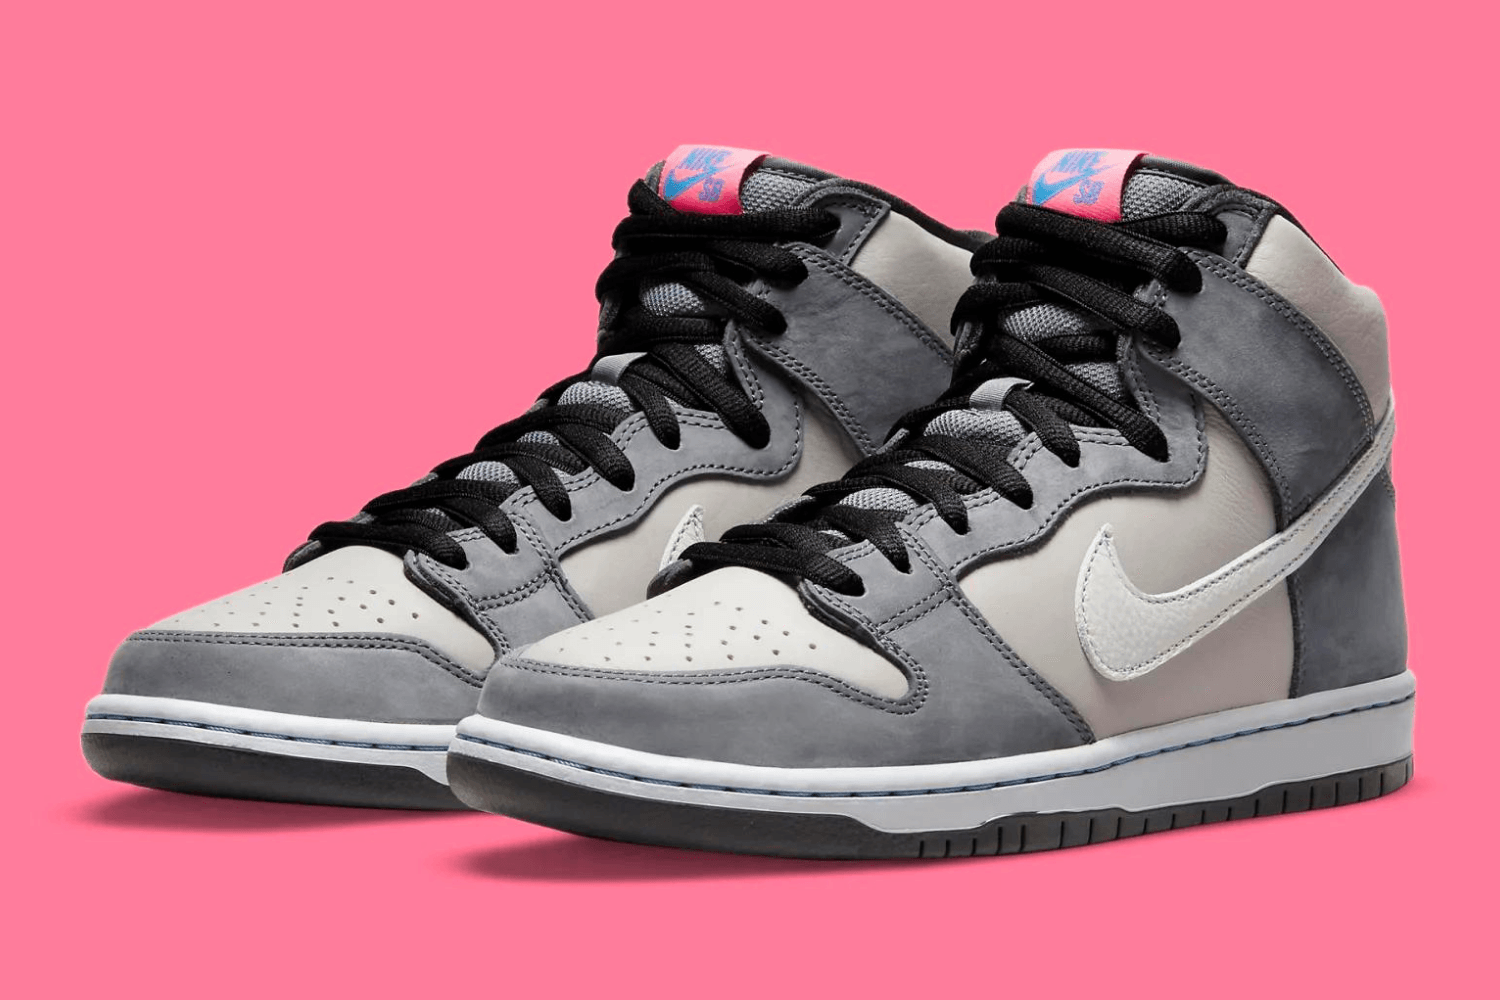 Official pictures of the Nike SB Dunk High 'Medium Grey'